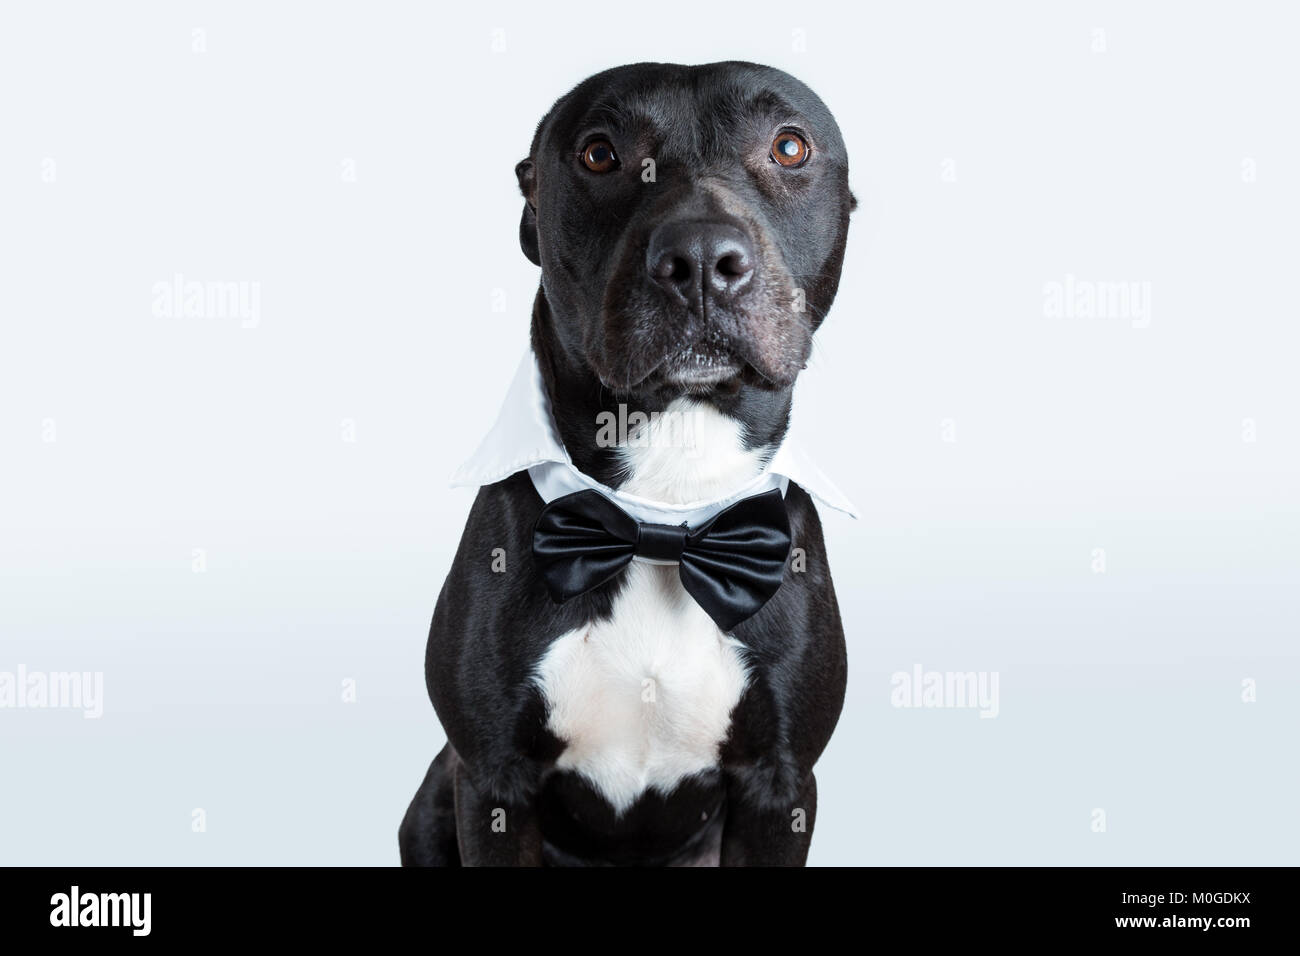 An american pitbull terrier wearing a bow tie collar in a ligth gray background looking at camera. Stock Photo